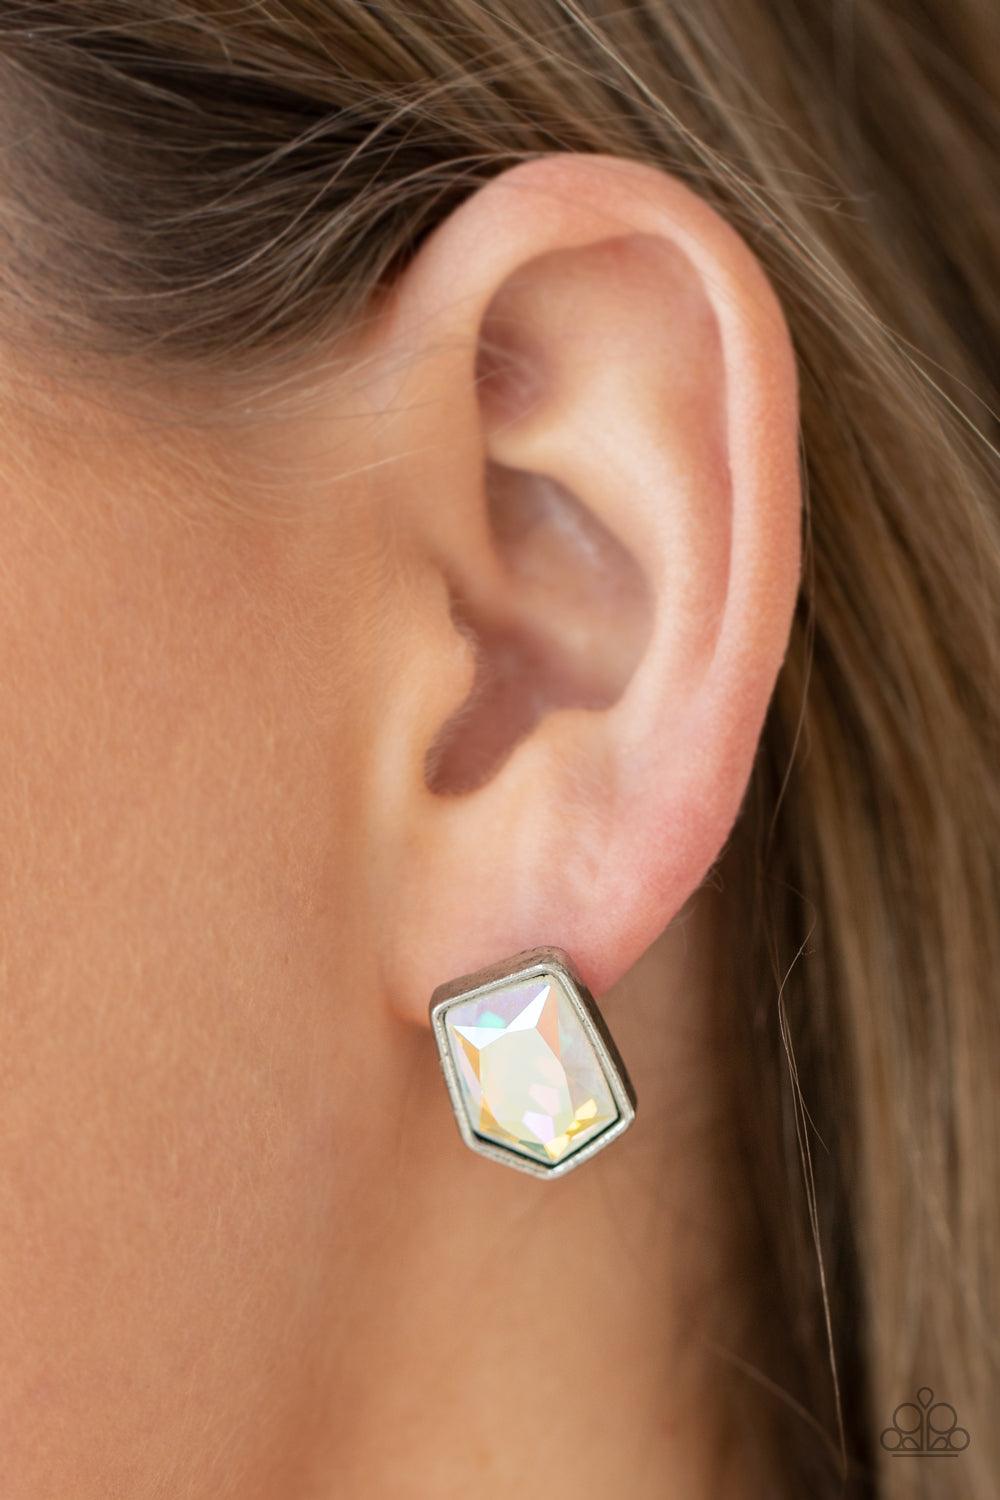 Paparazzi Accessories Indulge Me - Multi Featuring a raw asymmetrical cut, an iridescent gem is encased inside a sleek silver frame, creating a stellar display. Earring attaches to a standard post fitting. Sold as one pair of post earrings. Earrings